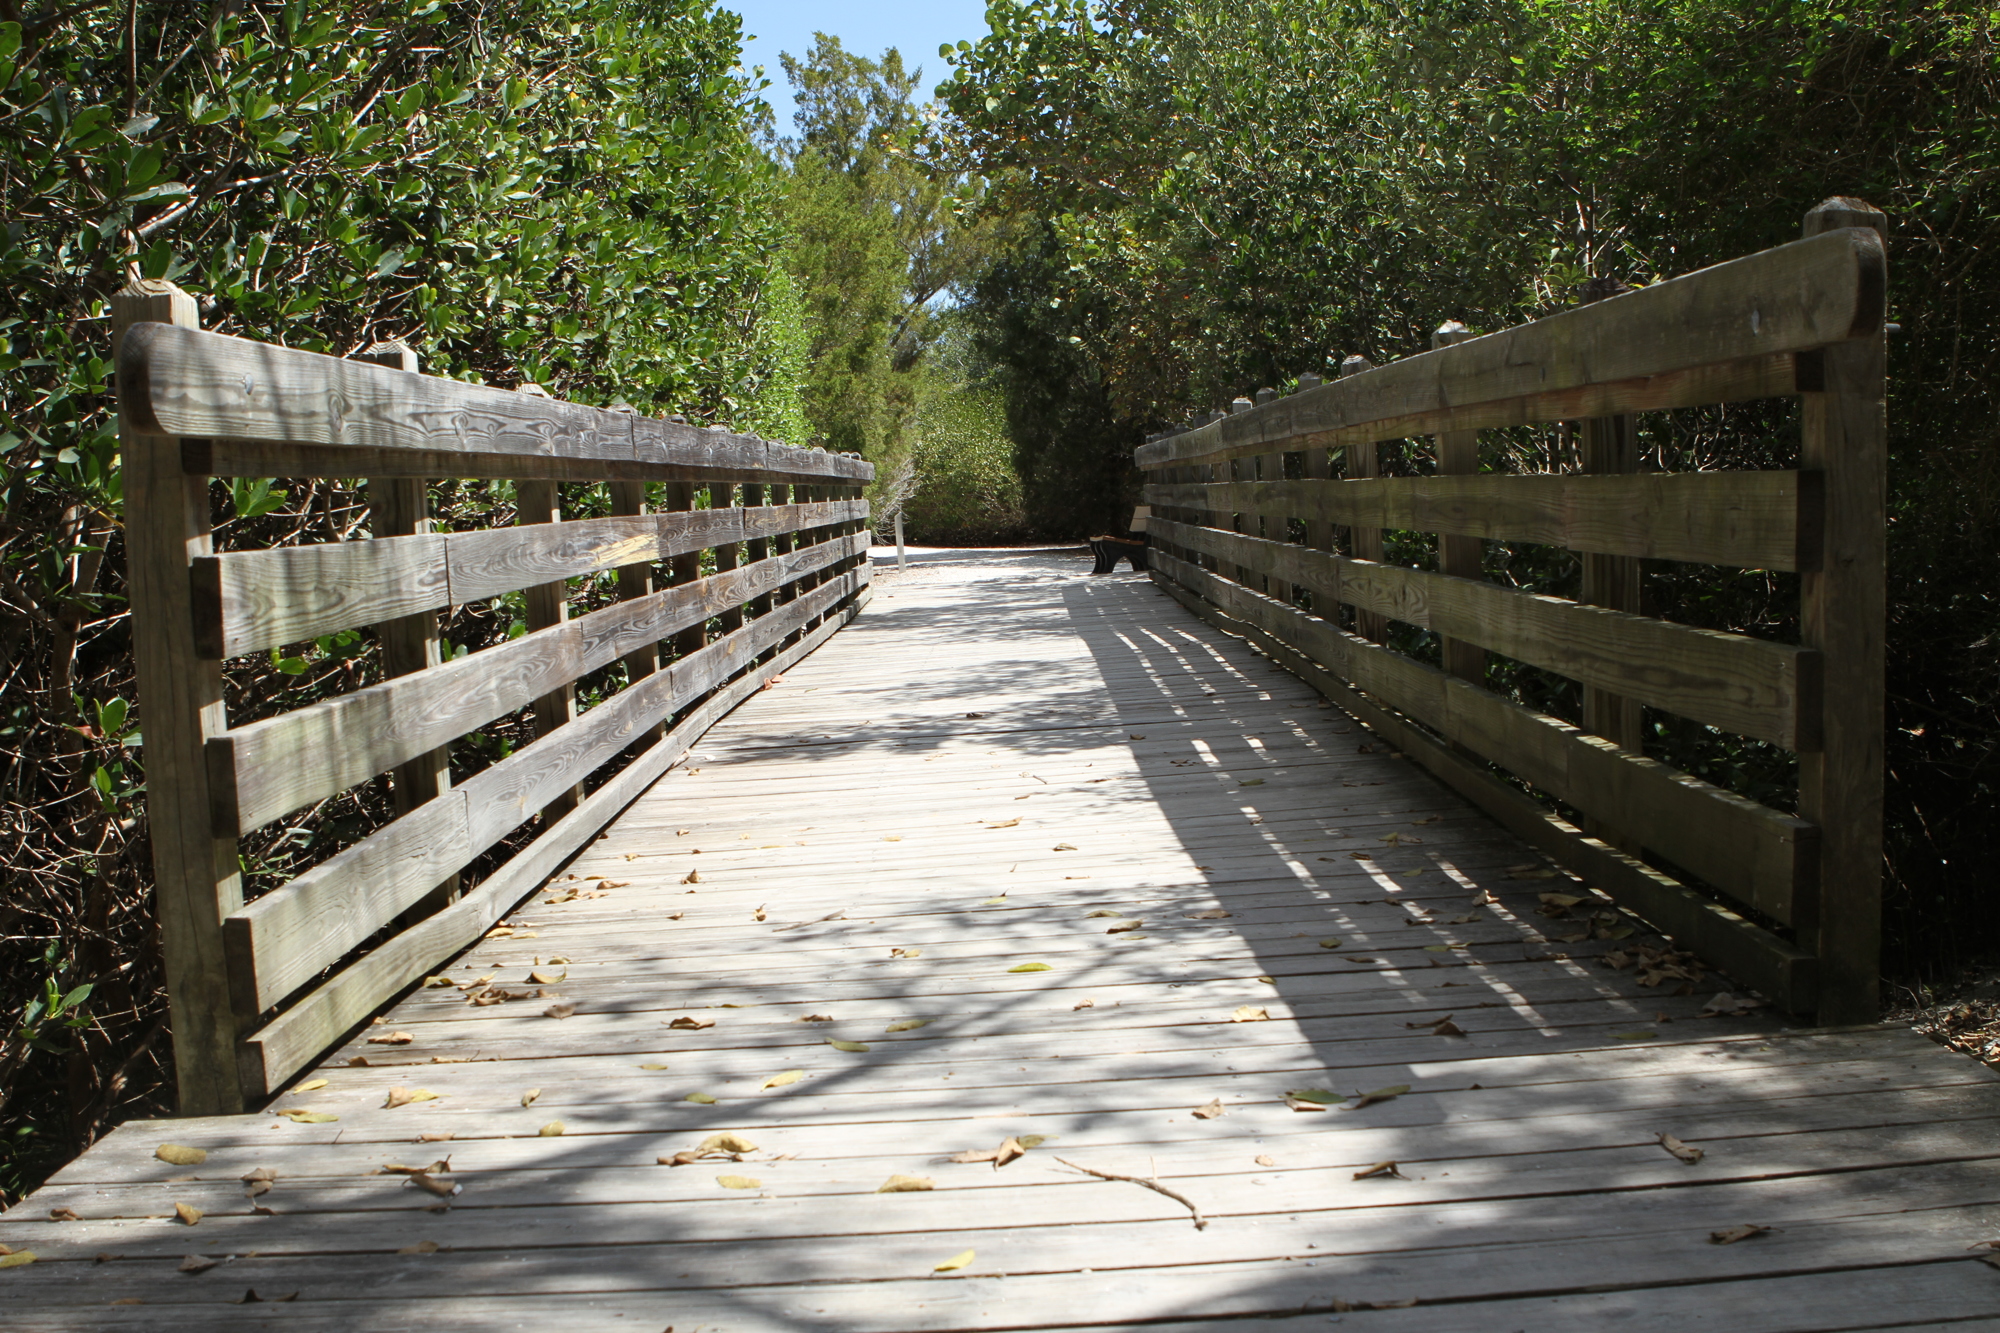 At Joan Durante Park, wooden pathways lead back into the wilderness.